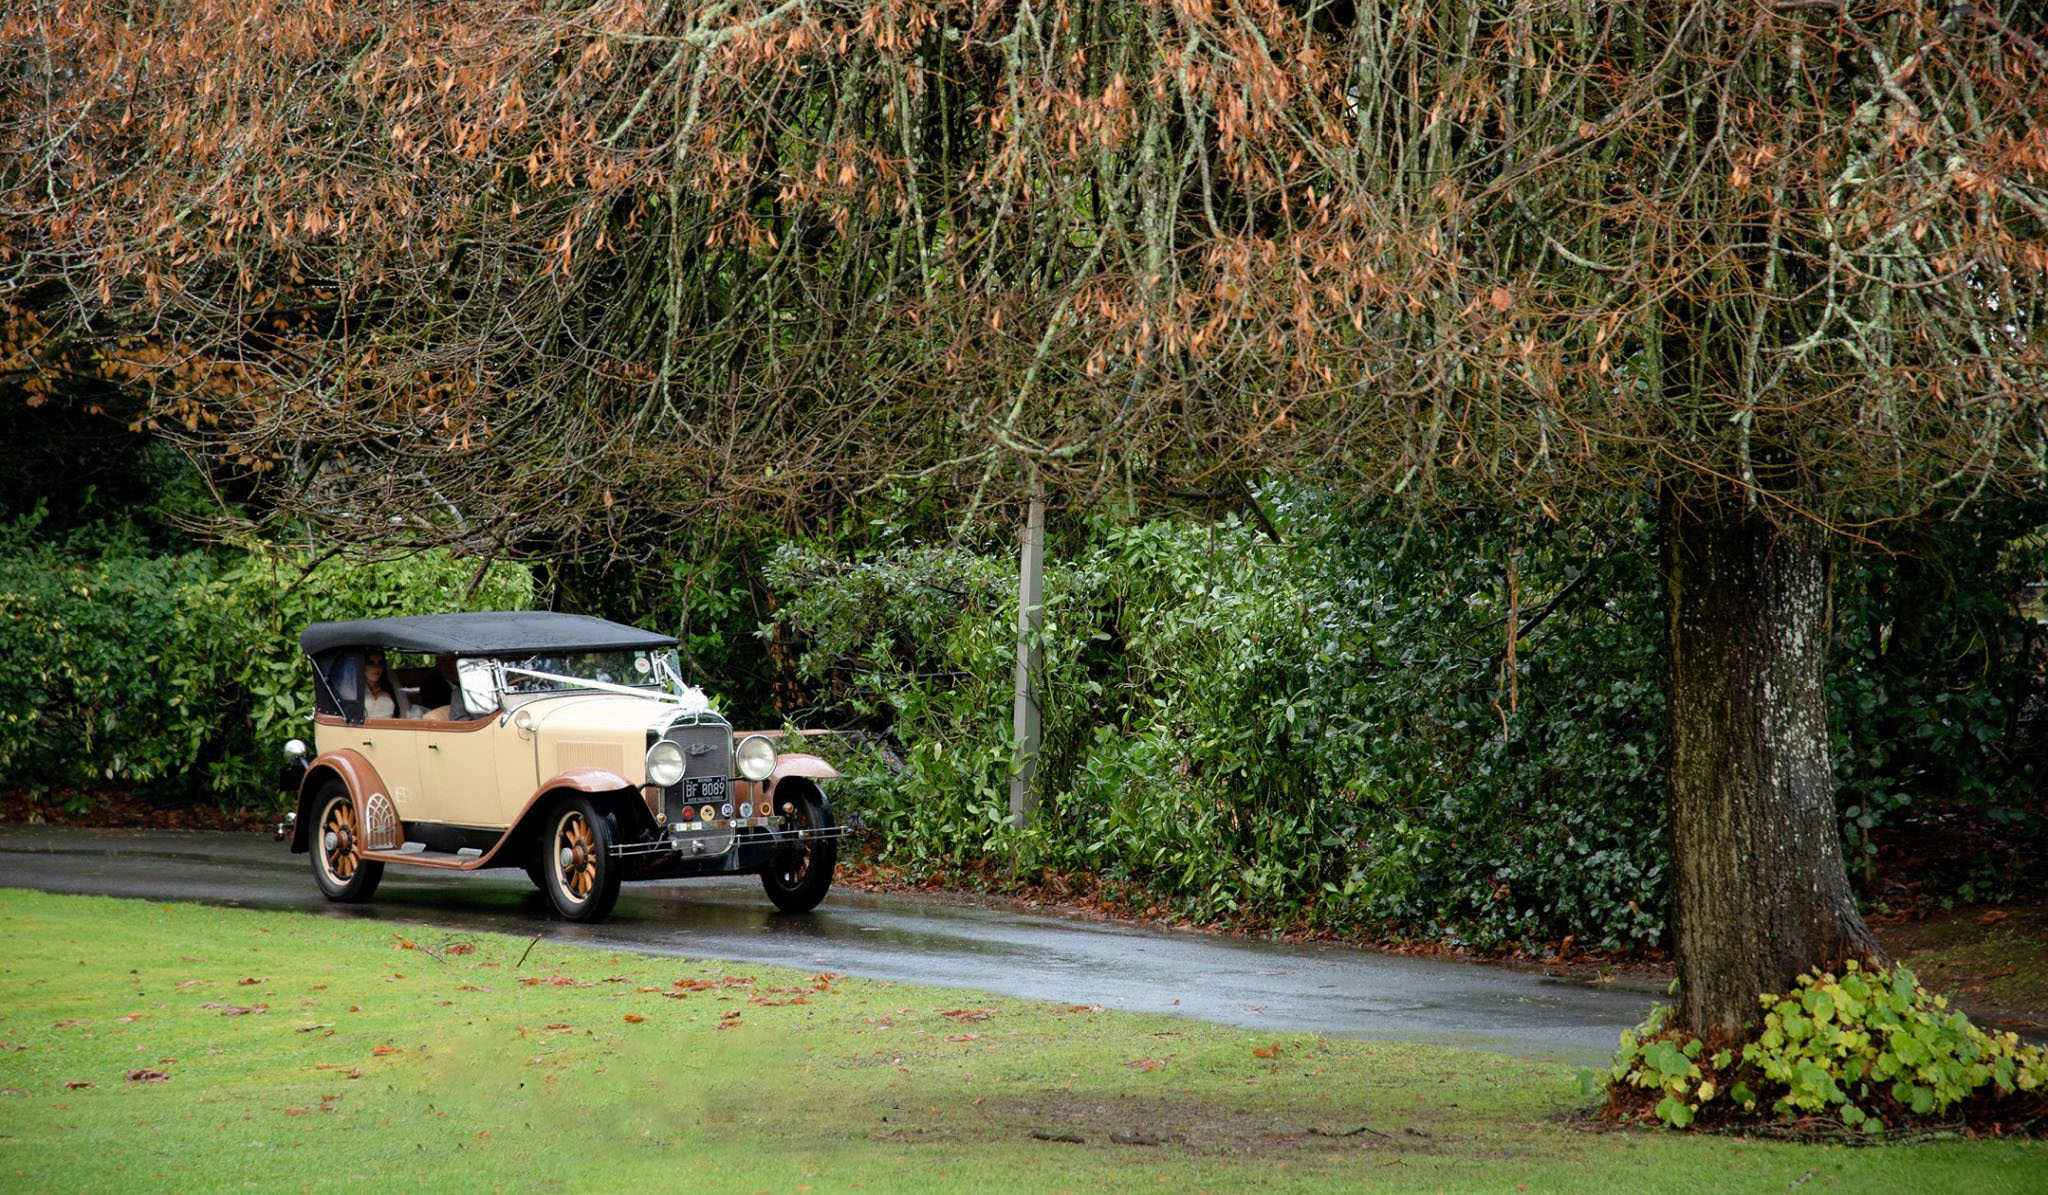 Vintage American Buick with cream and light brown colours dressed with white ribbons and black soft-top closed entering a venue in Devon. The Bride can be seen seated in the vehicle.